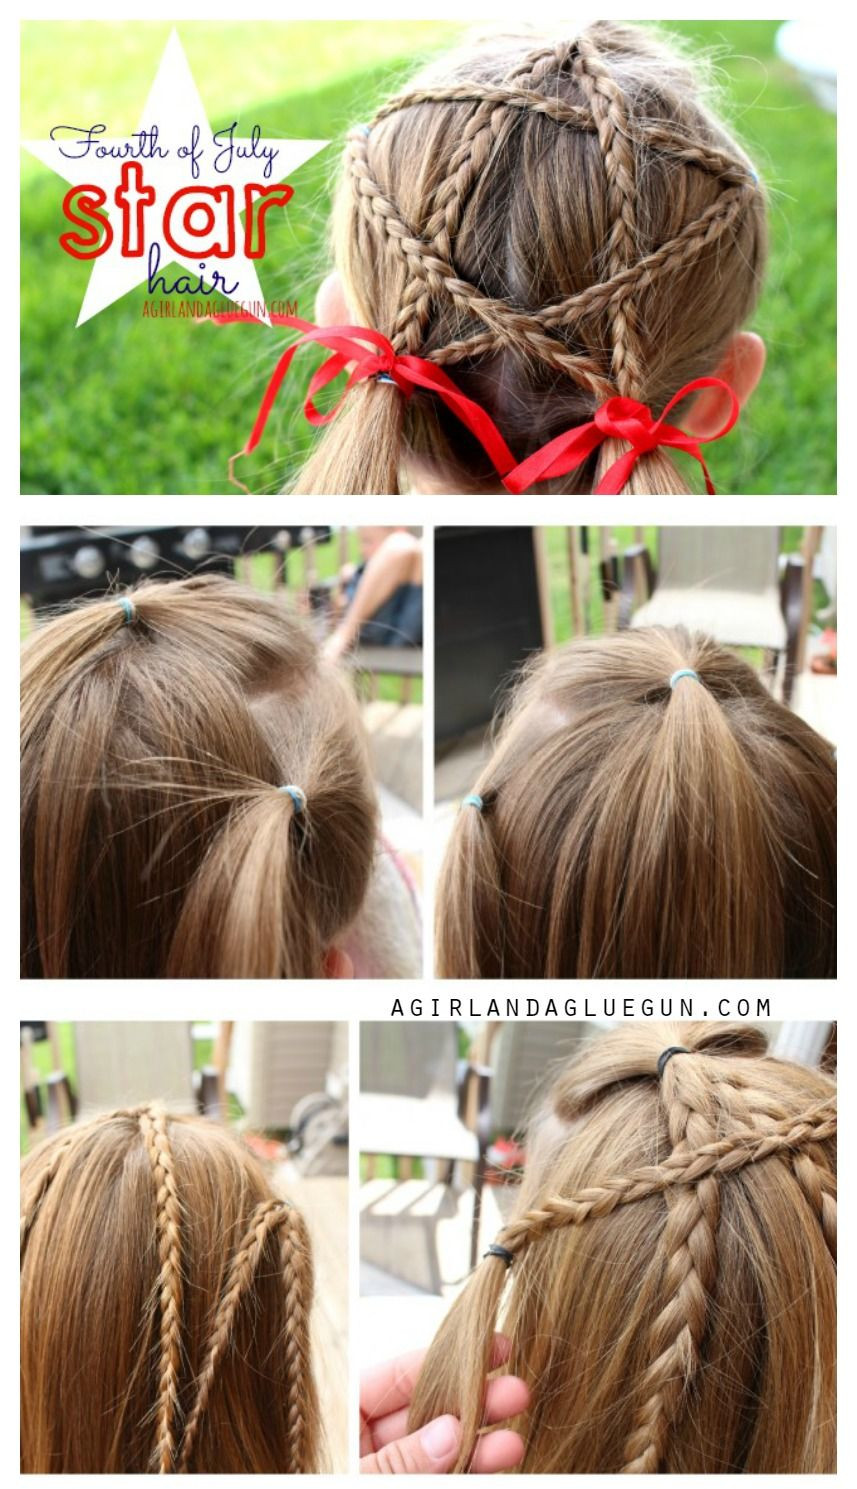 Star Hairstyle For Little Girl
 fourth of july STAR hair